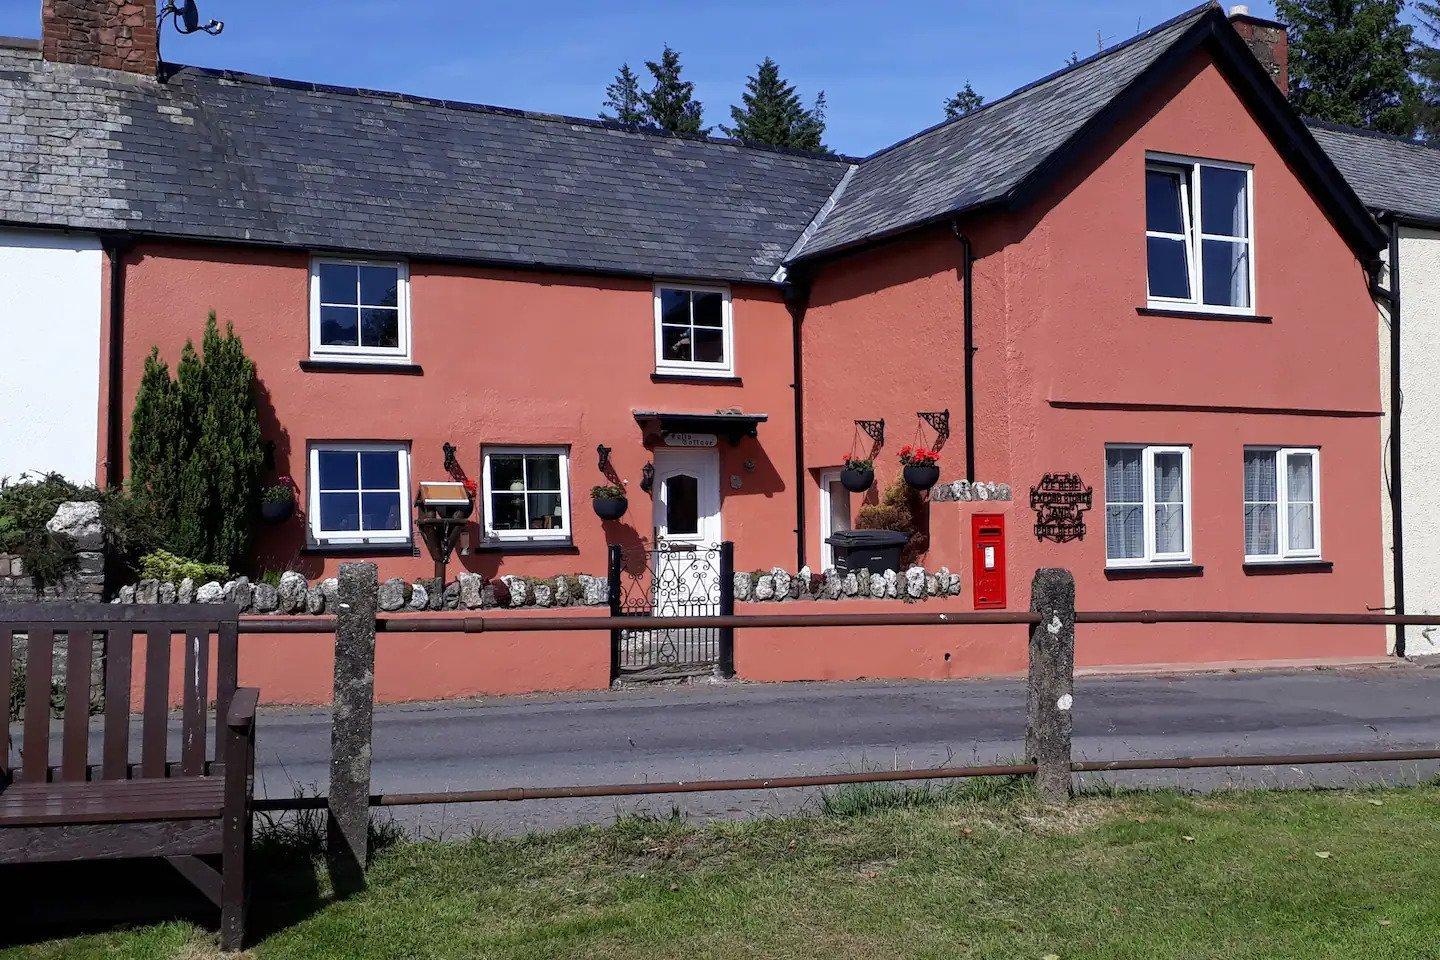 The Old Post Office, Exford